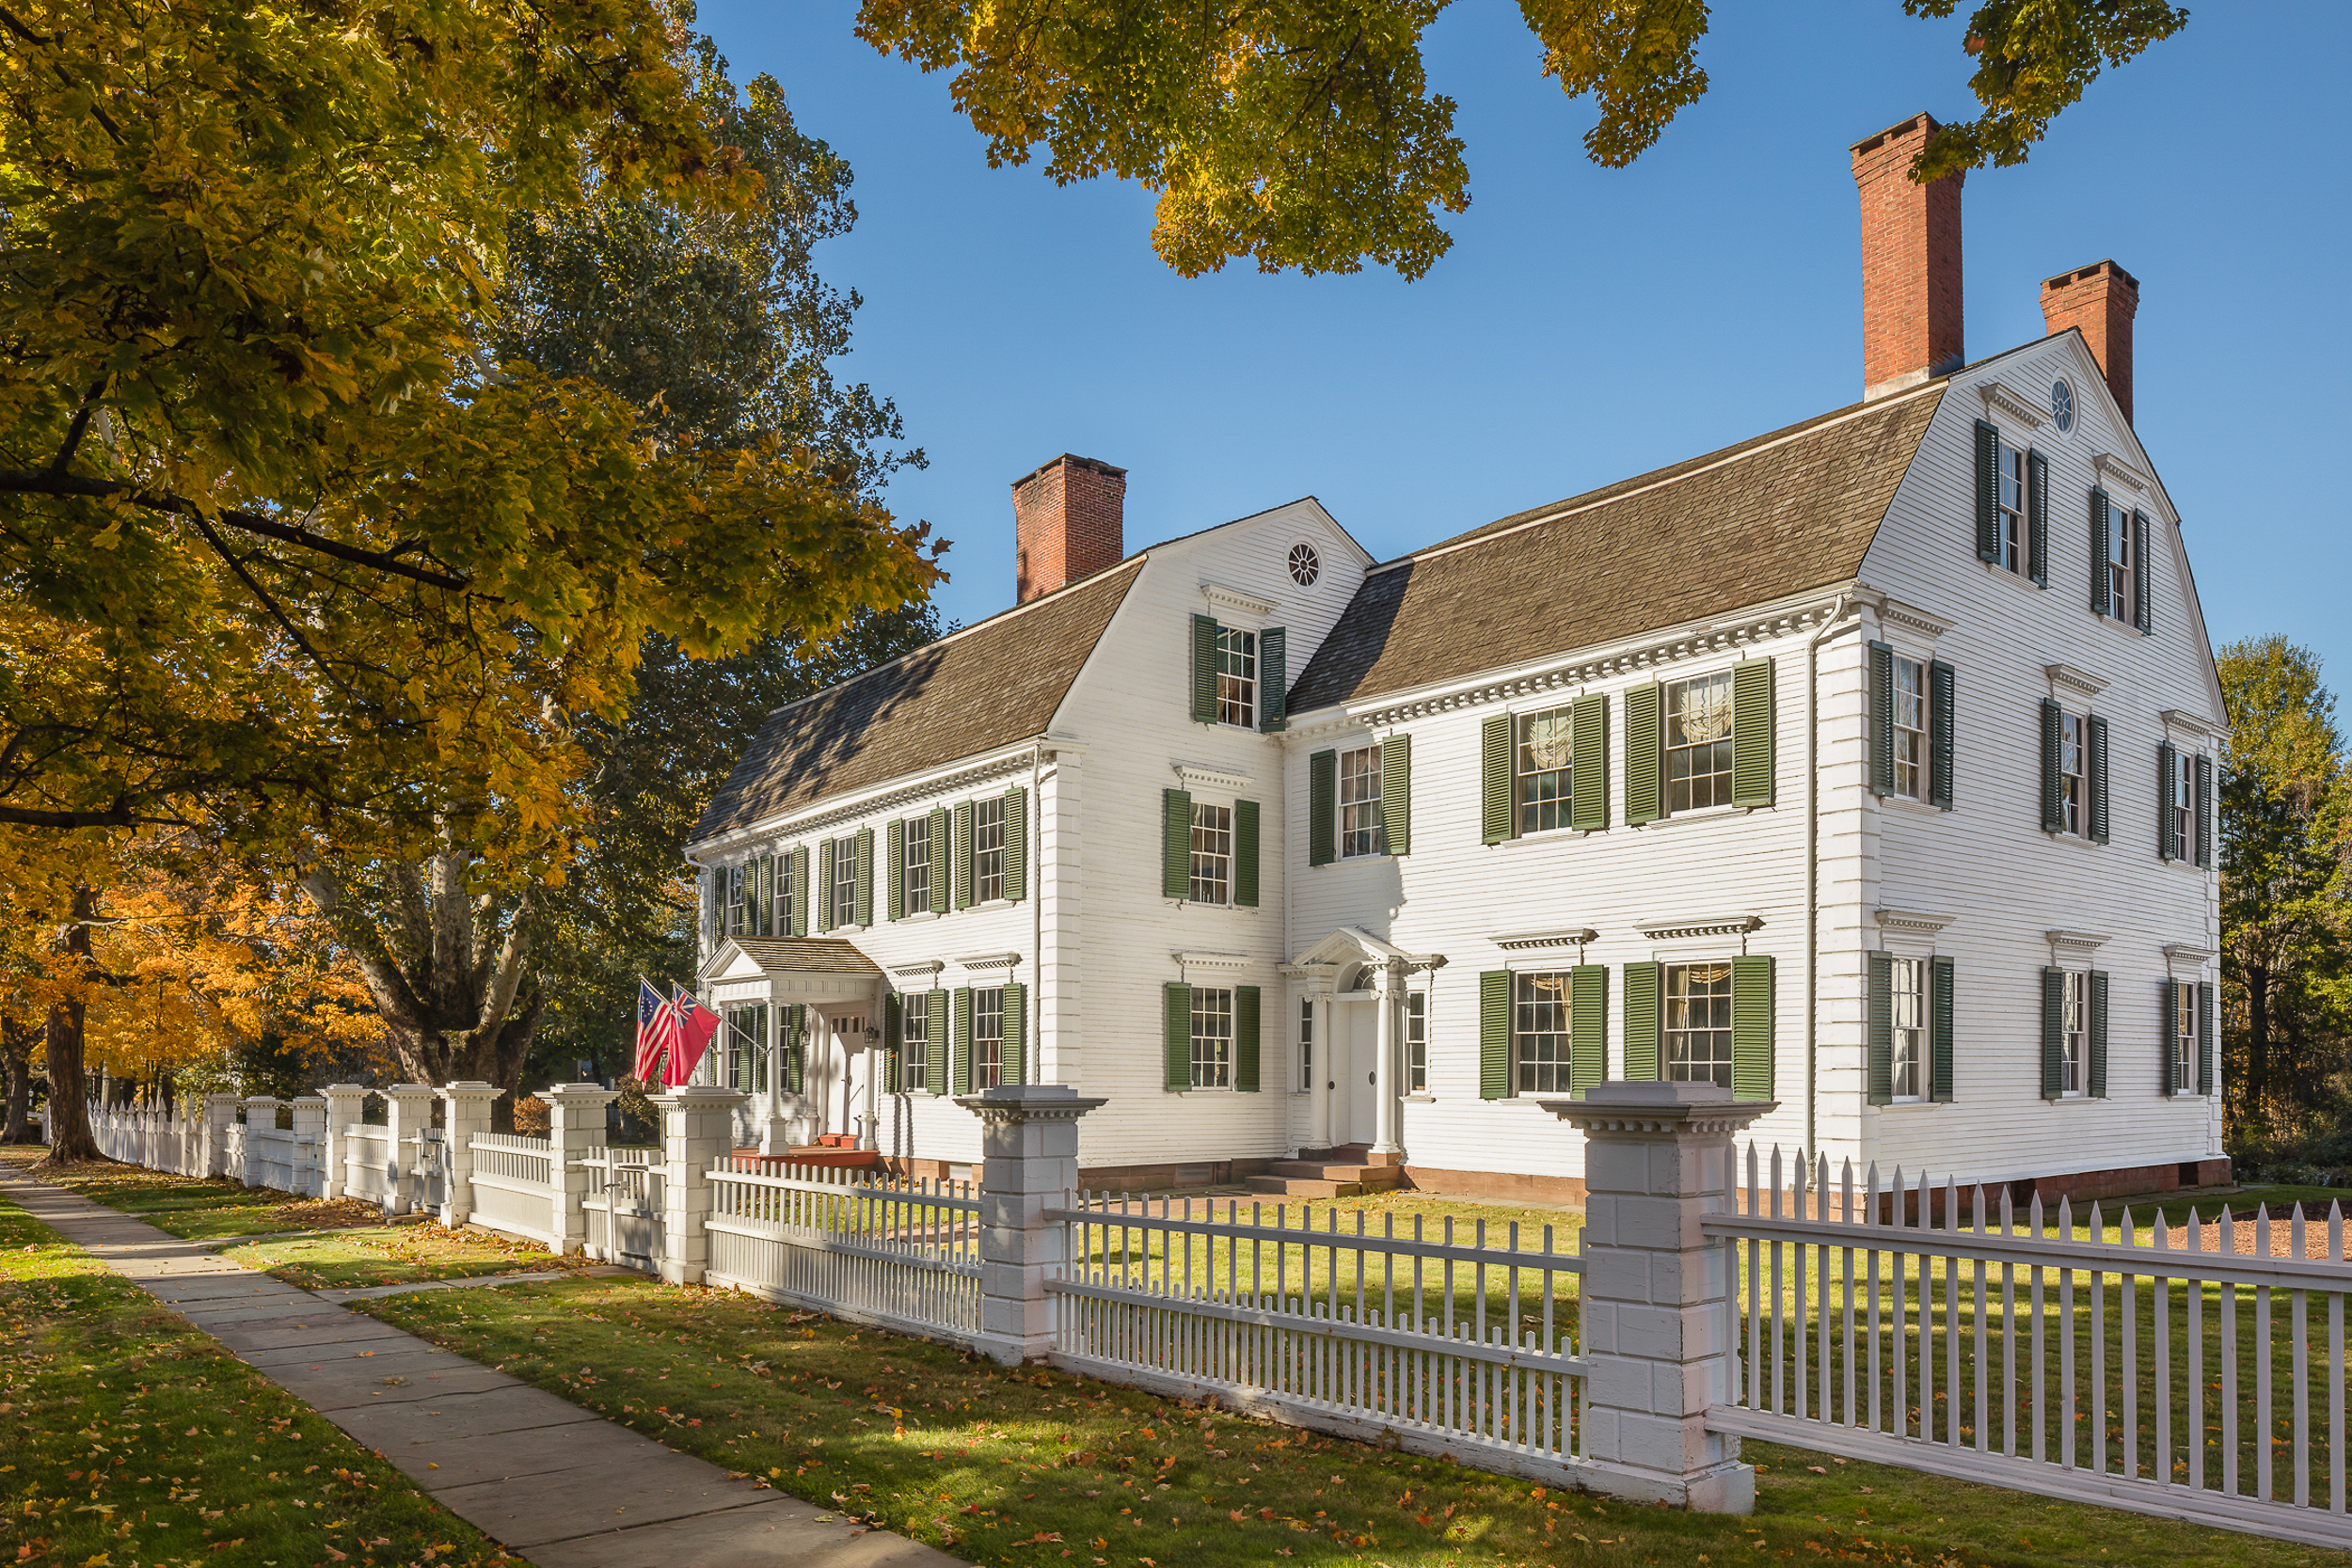 CT Landmarks' Phelps-Hathaway House. Suffield, CT